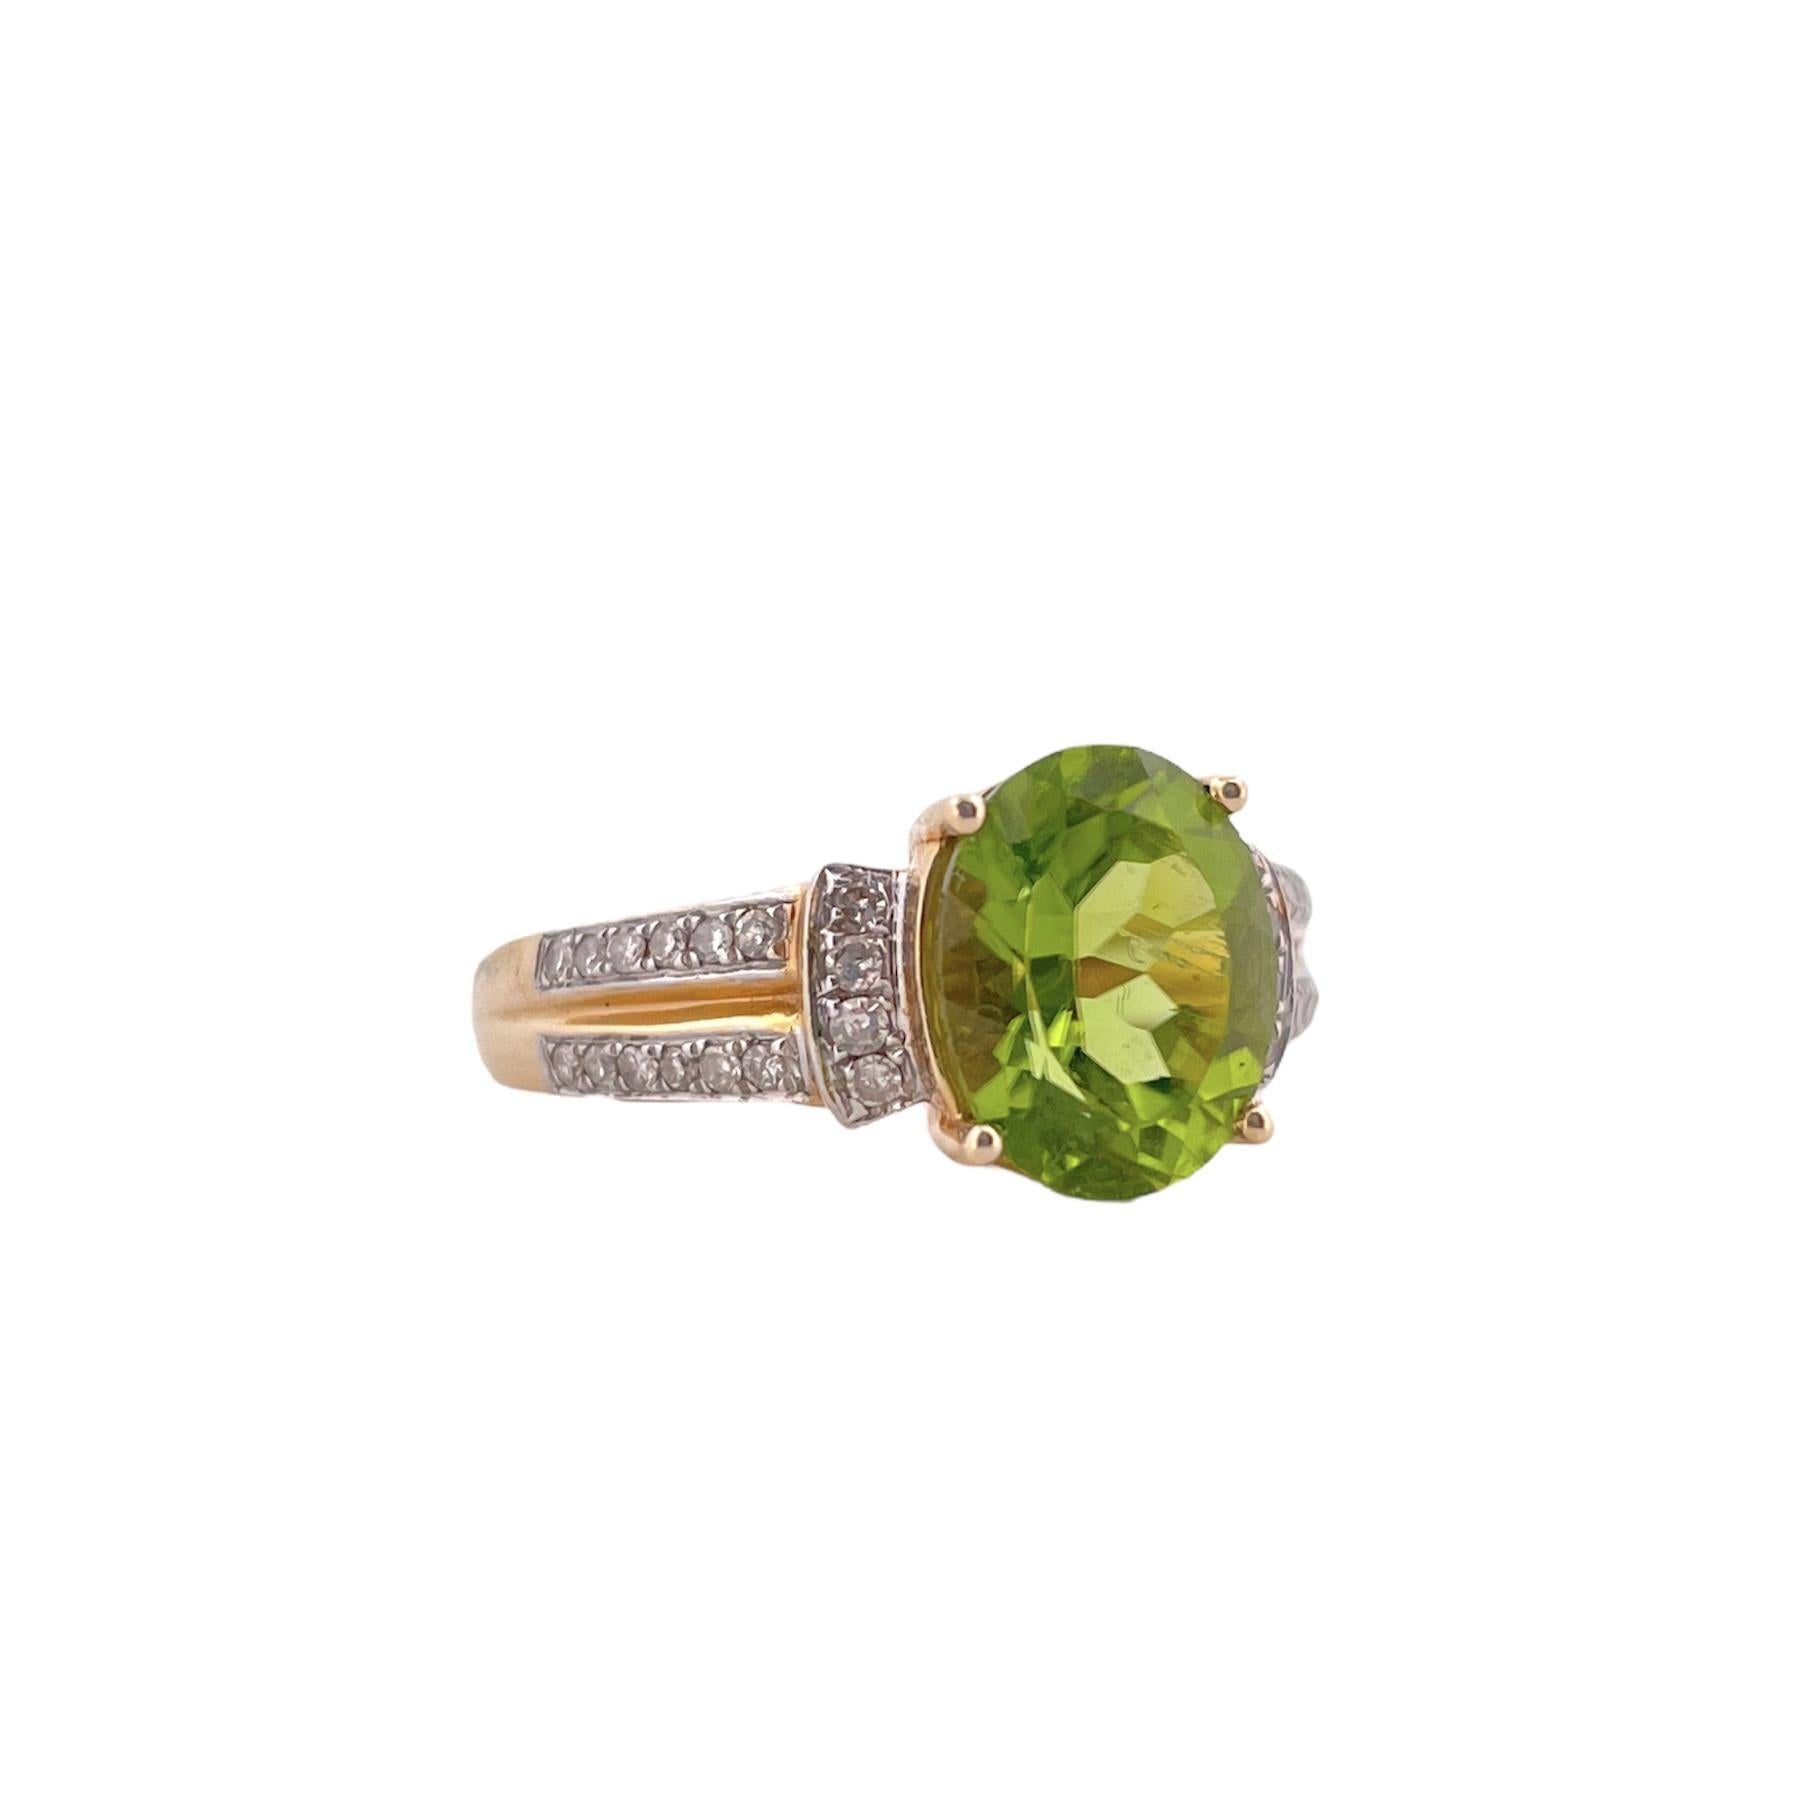 Retro Oval Peridot Ring with Diamond Accents - 14K Yellow Gold For Sale